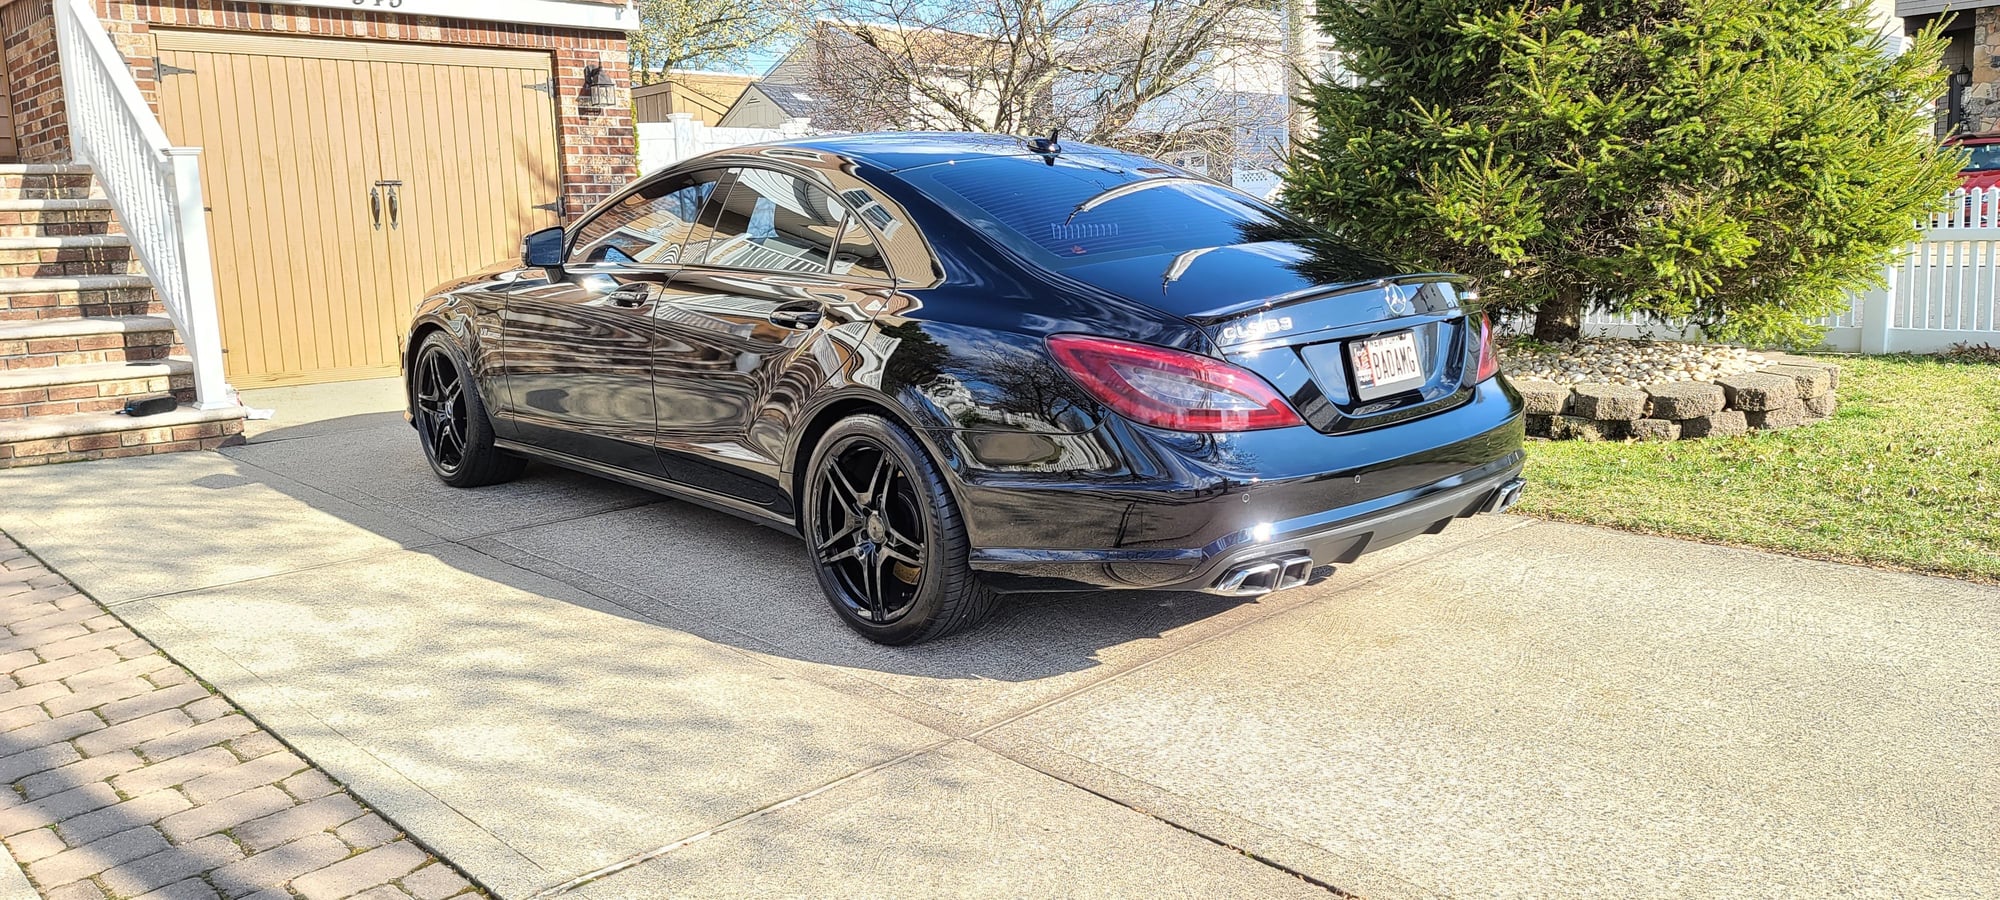 2013 Mercedes-Benz CLS63 AMG - 2013 CLS63 AMG Low Miles with Extended Warranty - Used - VIN WDDLJ7EB6DA079094 - 36,000 Miles - 8 cyl - 2WD - Automatic - Coupe - Black - Staten Island, NY 10312, United States